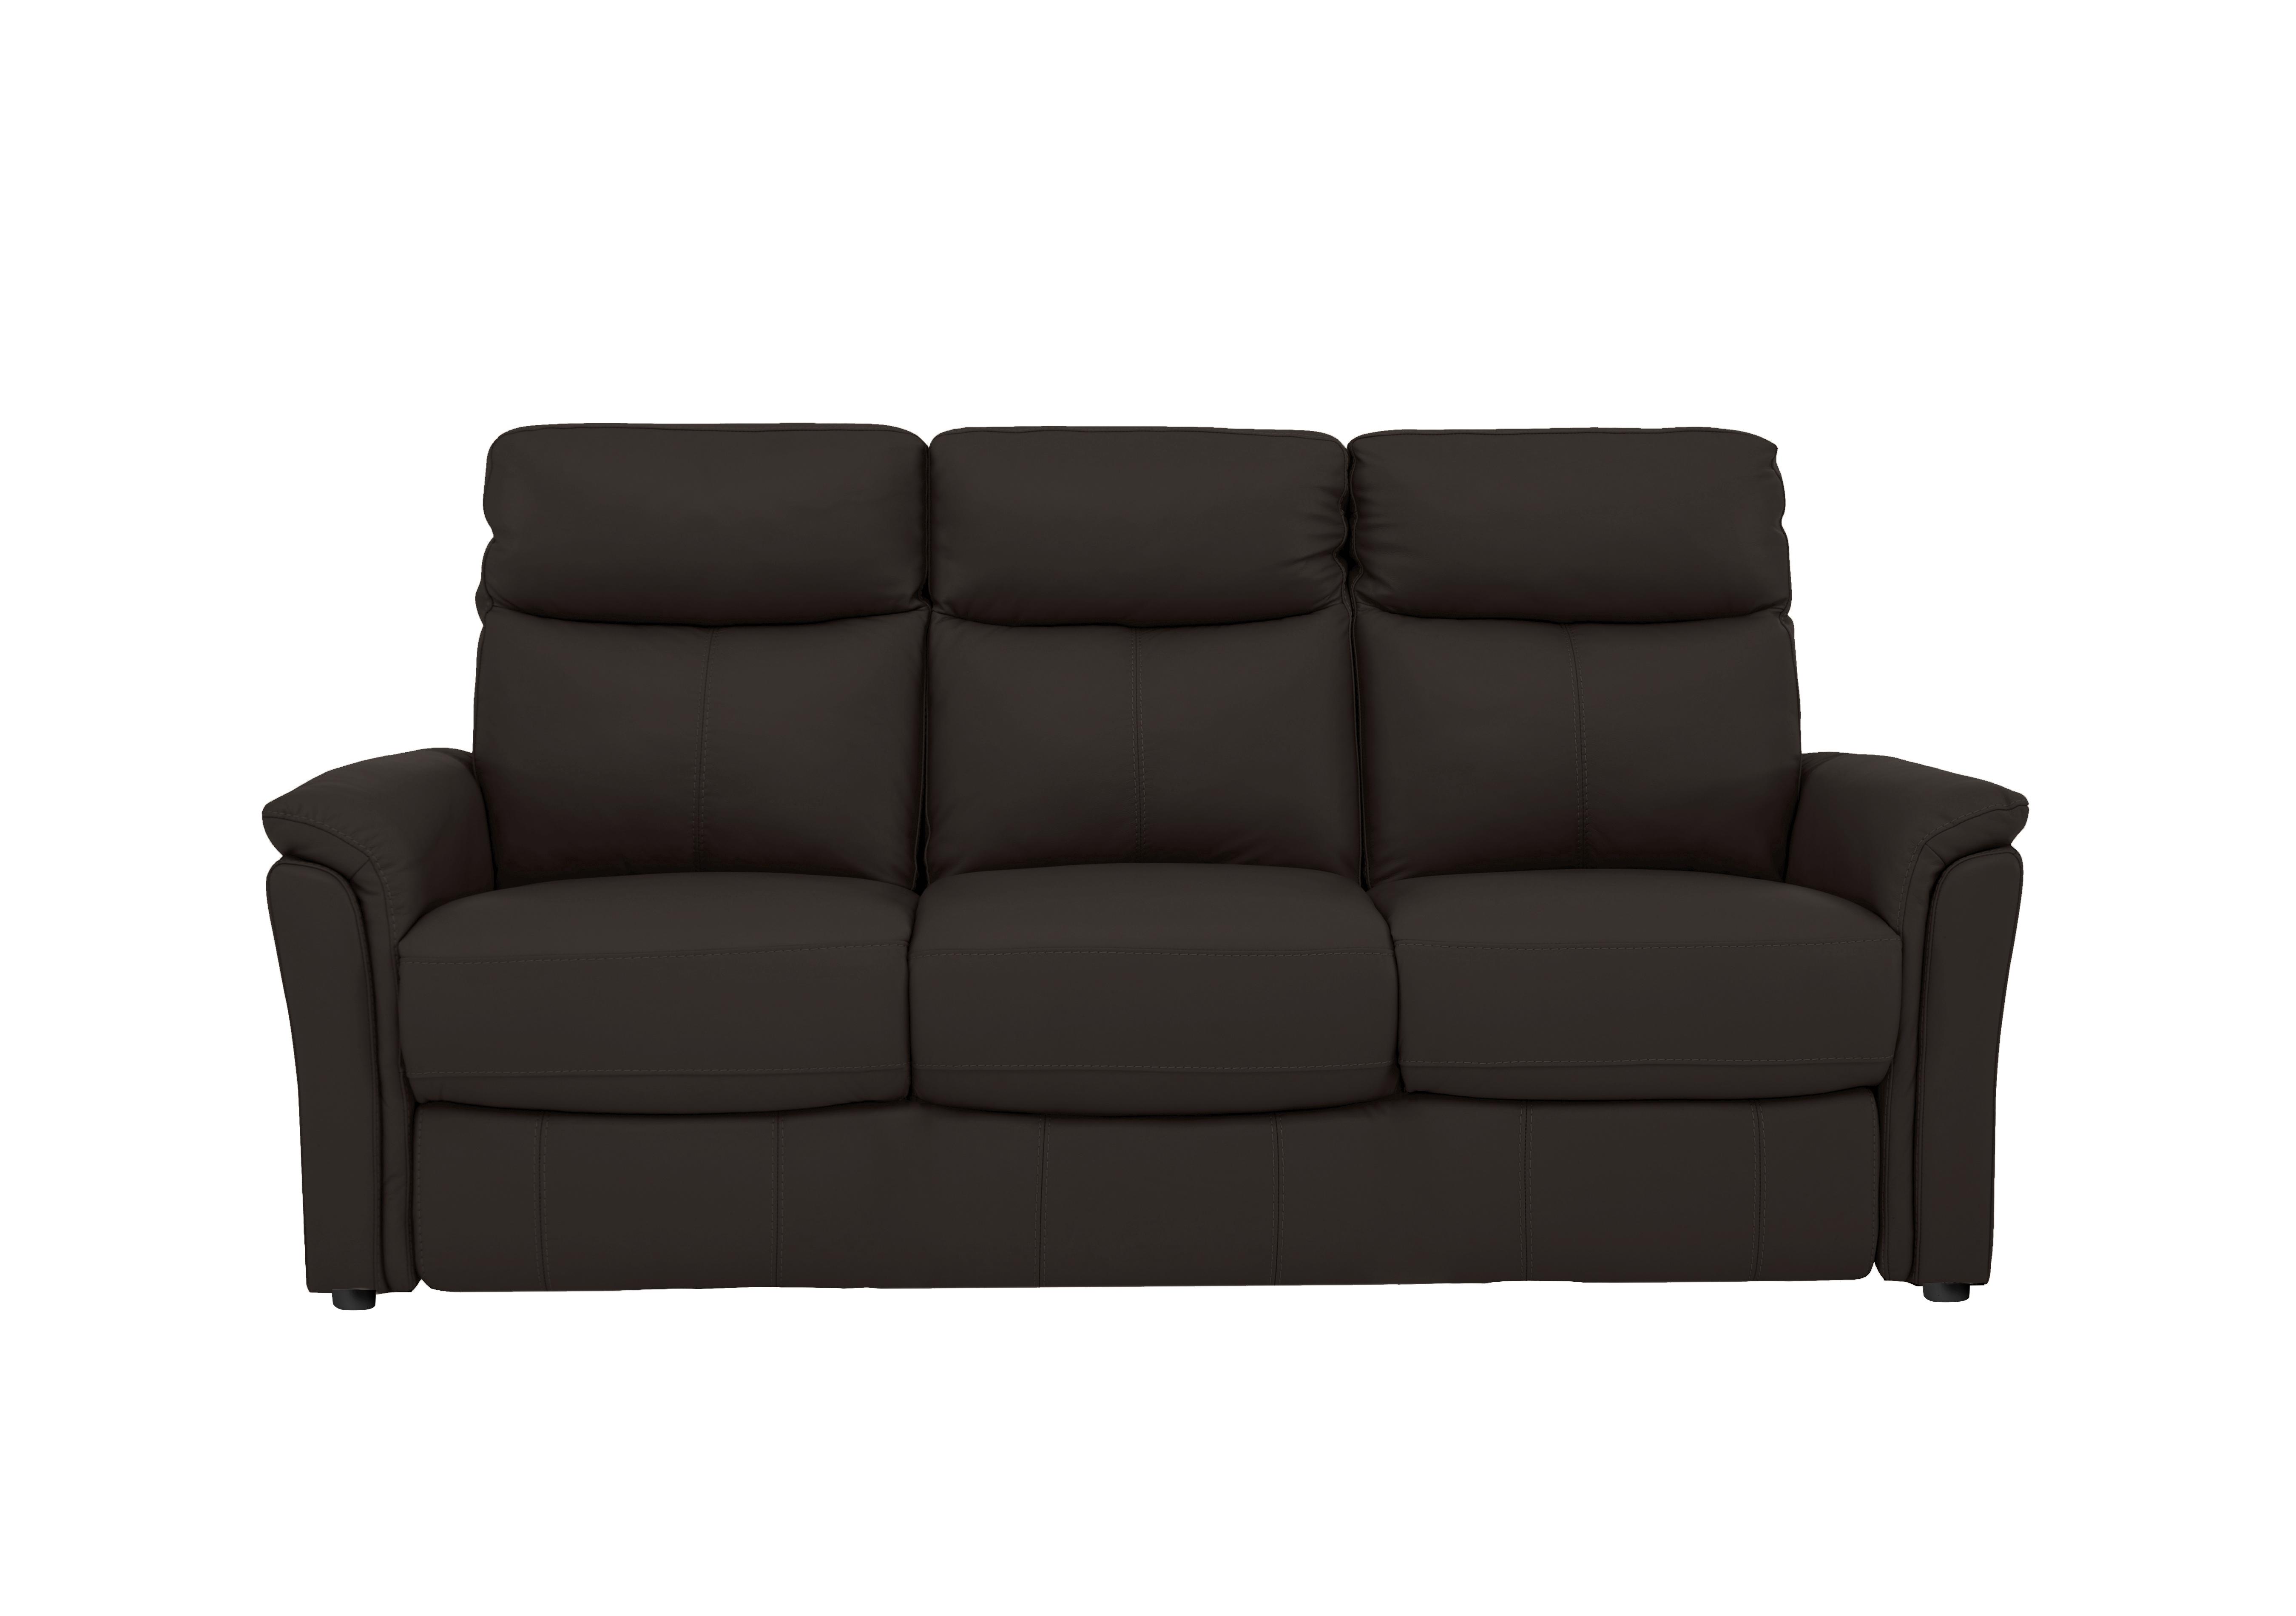 Compact Collection Piccolo 3 Seater Leather Static Sofa in Bv-1748 Dark Chocolate on Furniture Village